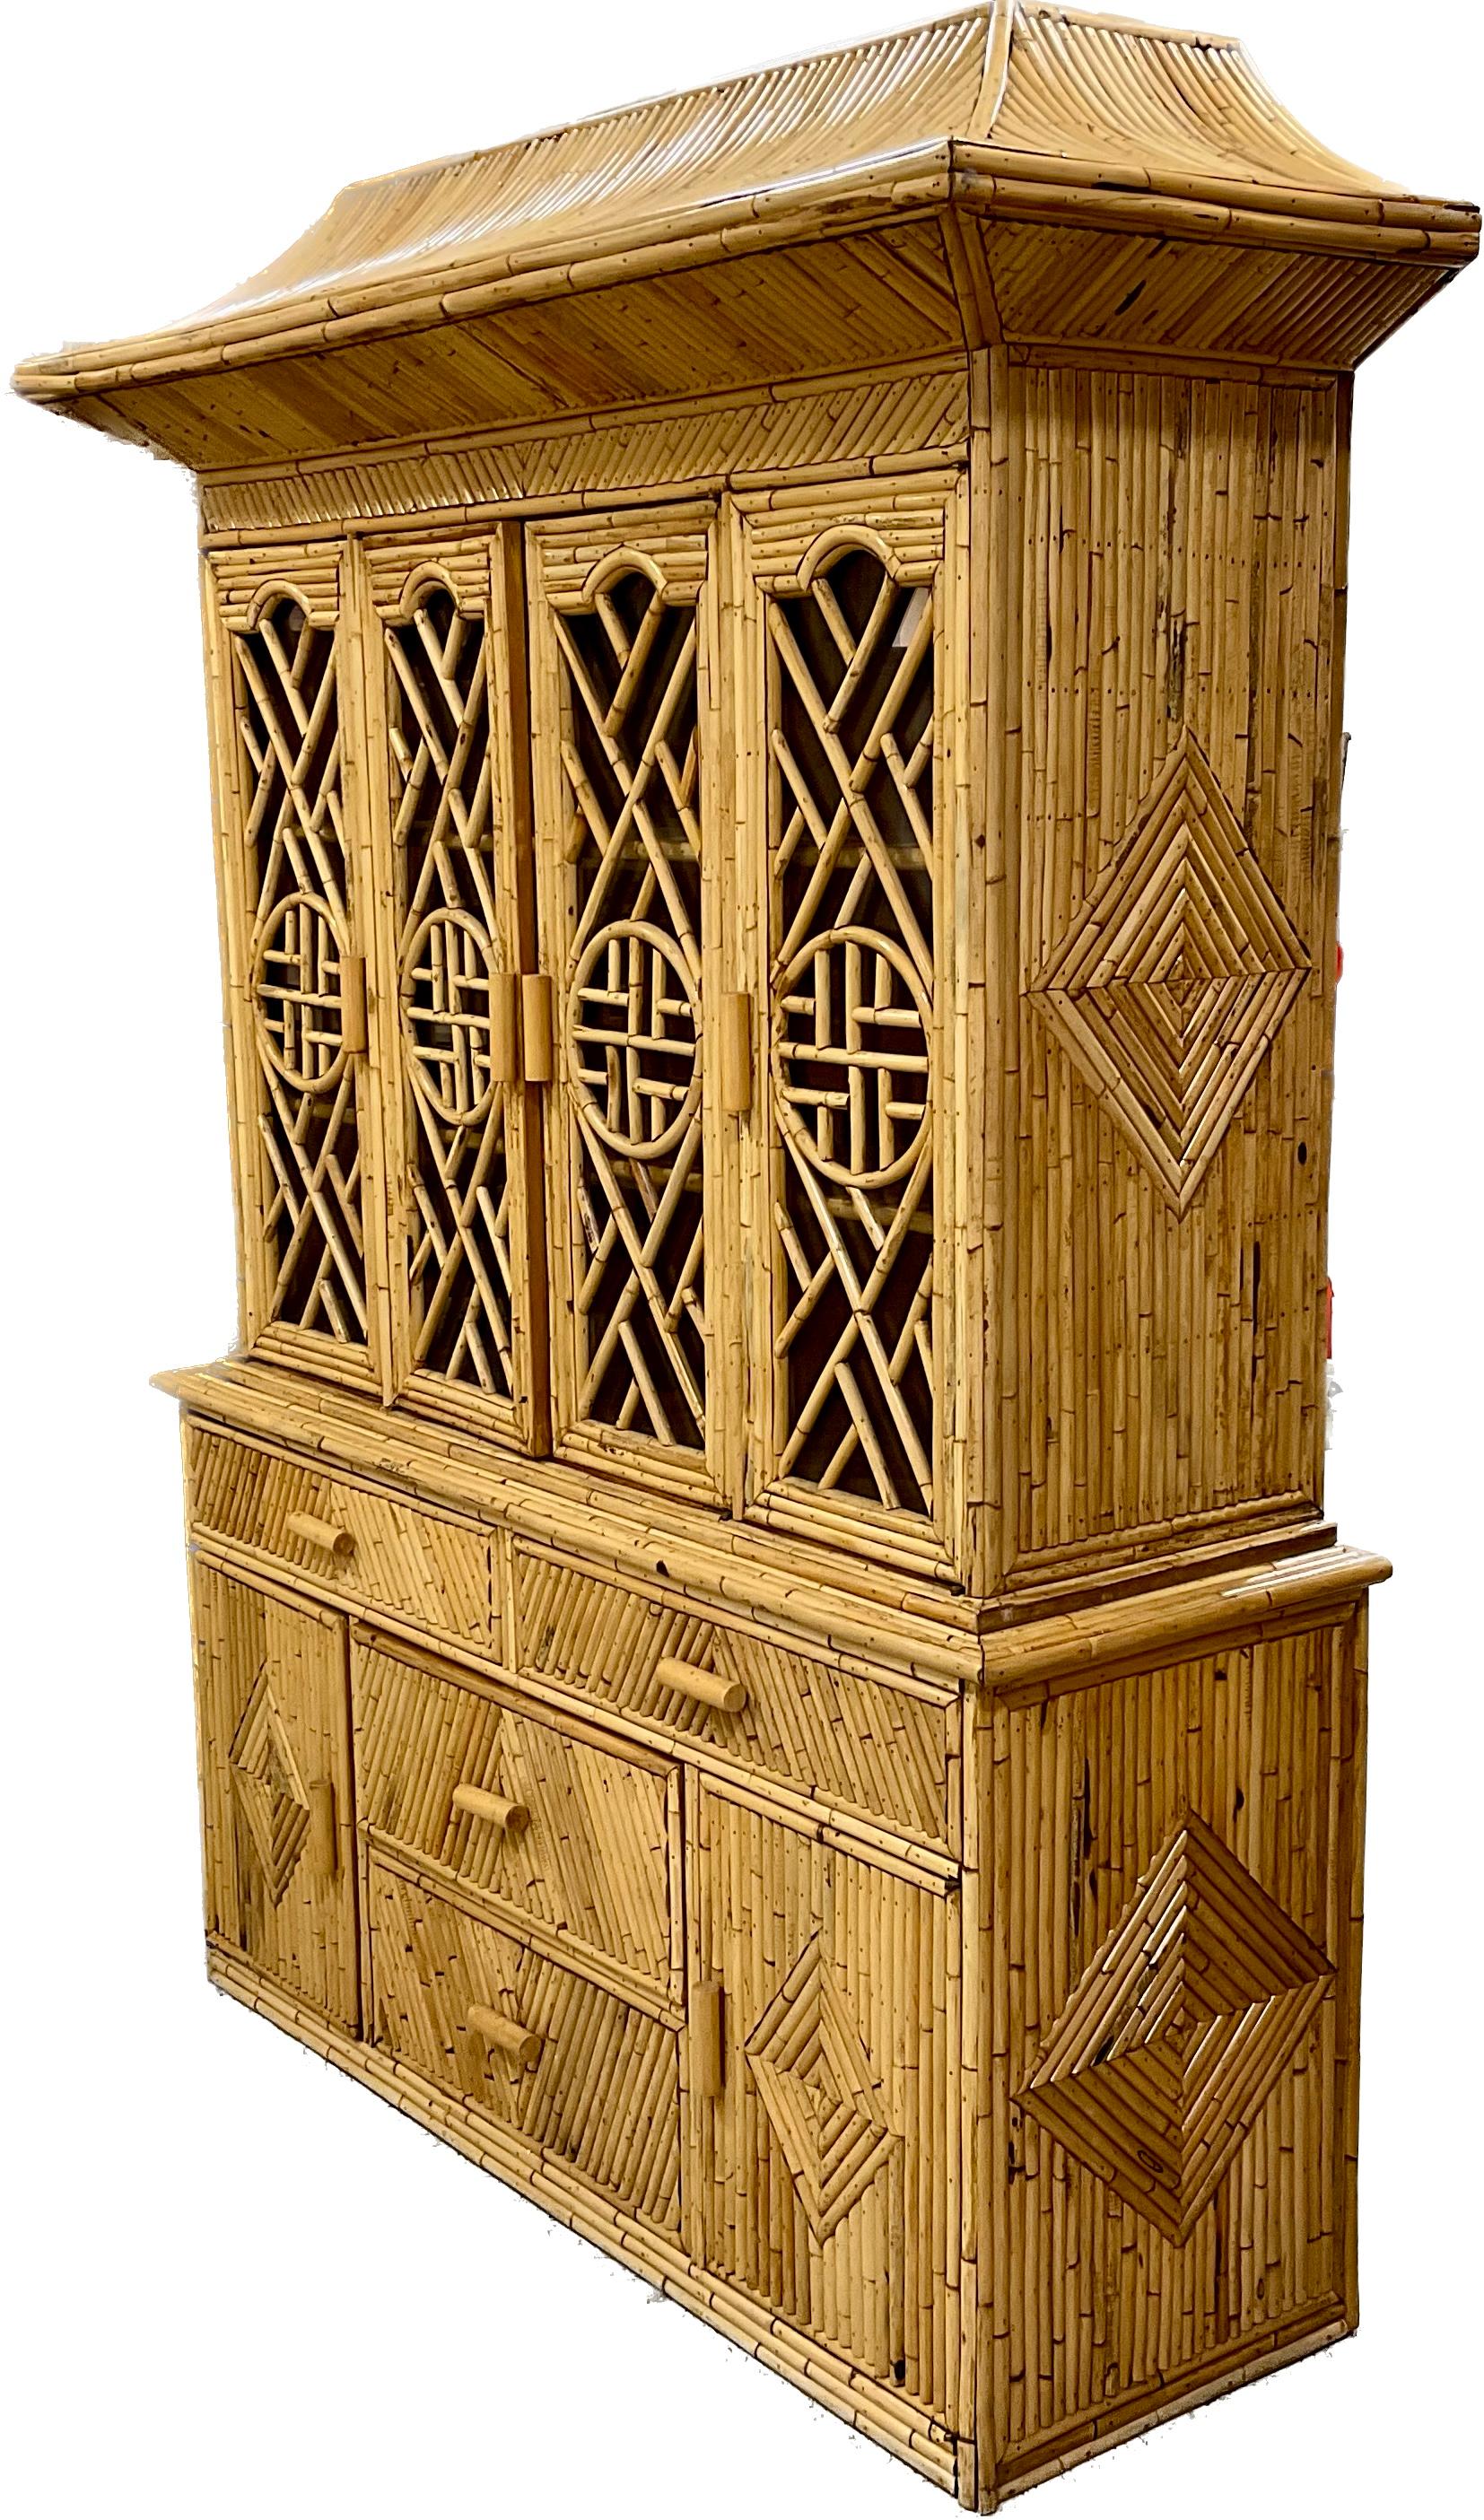 Stunning two part Pagoda Shape pencil reed rattan Cabinet in two parts with interior shelves in the top and drawers and cabinets in the bottom for plenty of storage and display.  Chinese Chippendale Brighton Pavillion style mid century Palm Beach